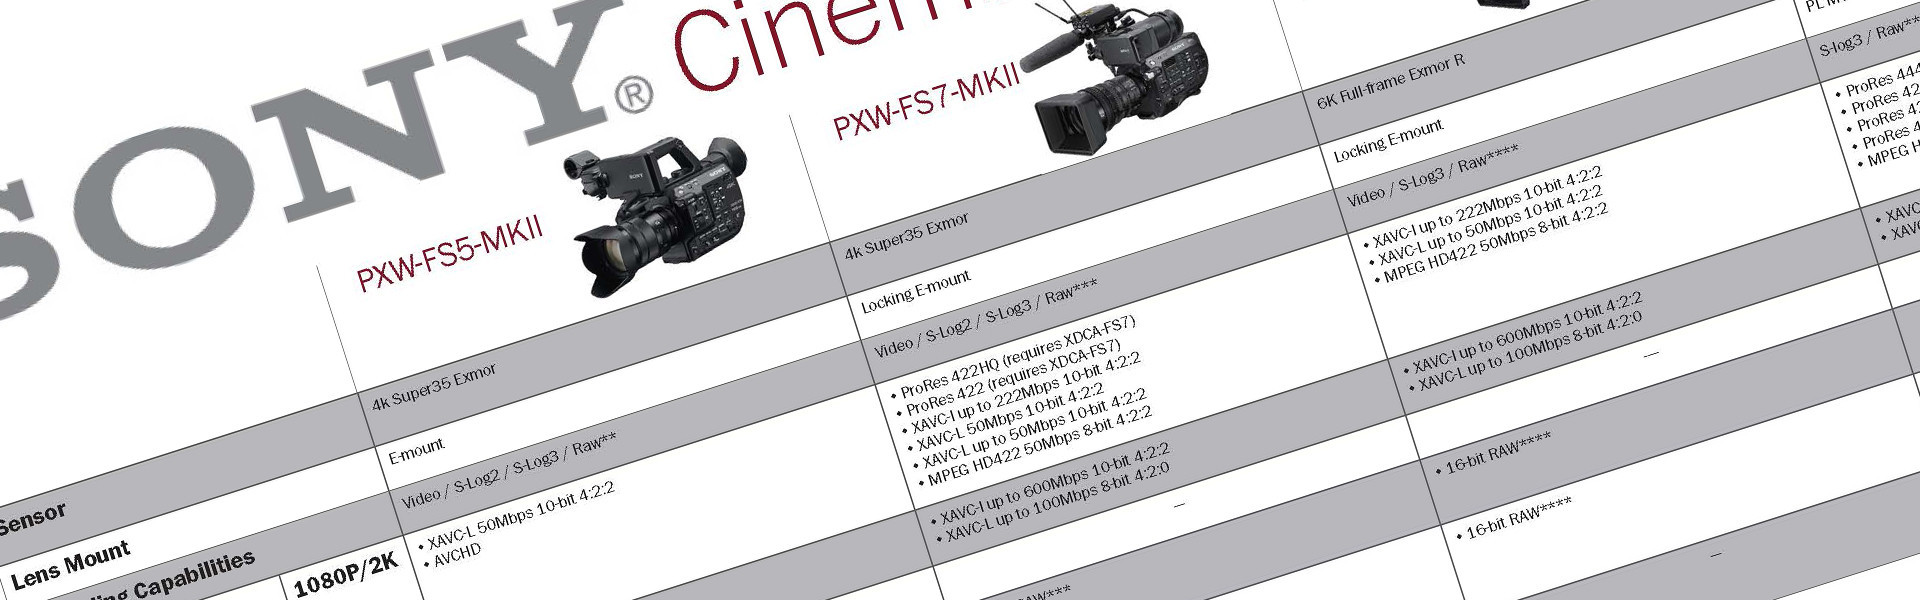 Header image for article Sony Cinematic Sensor Camera Lineup